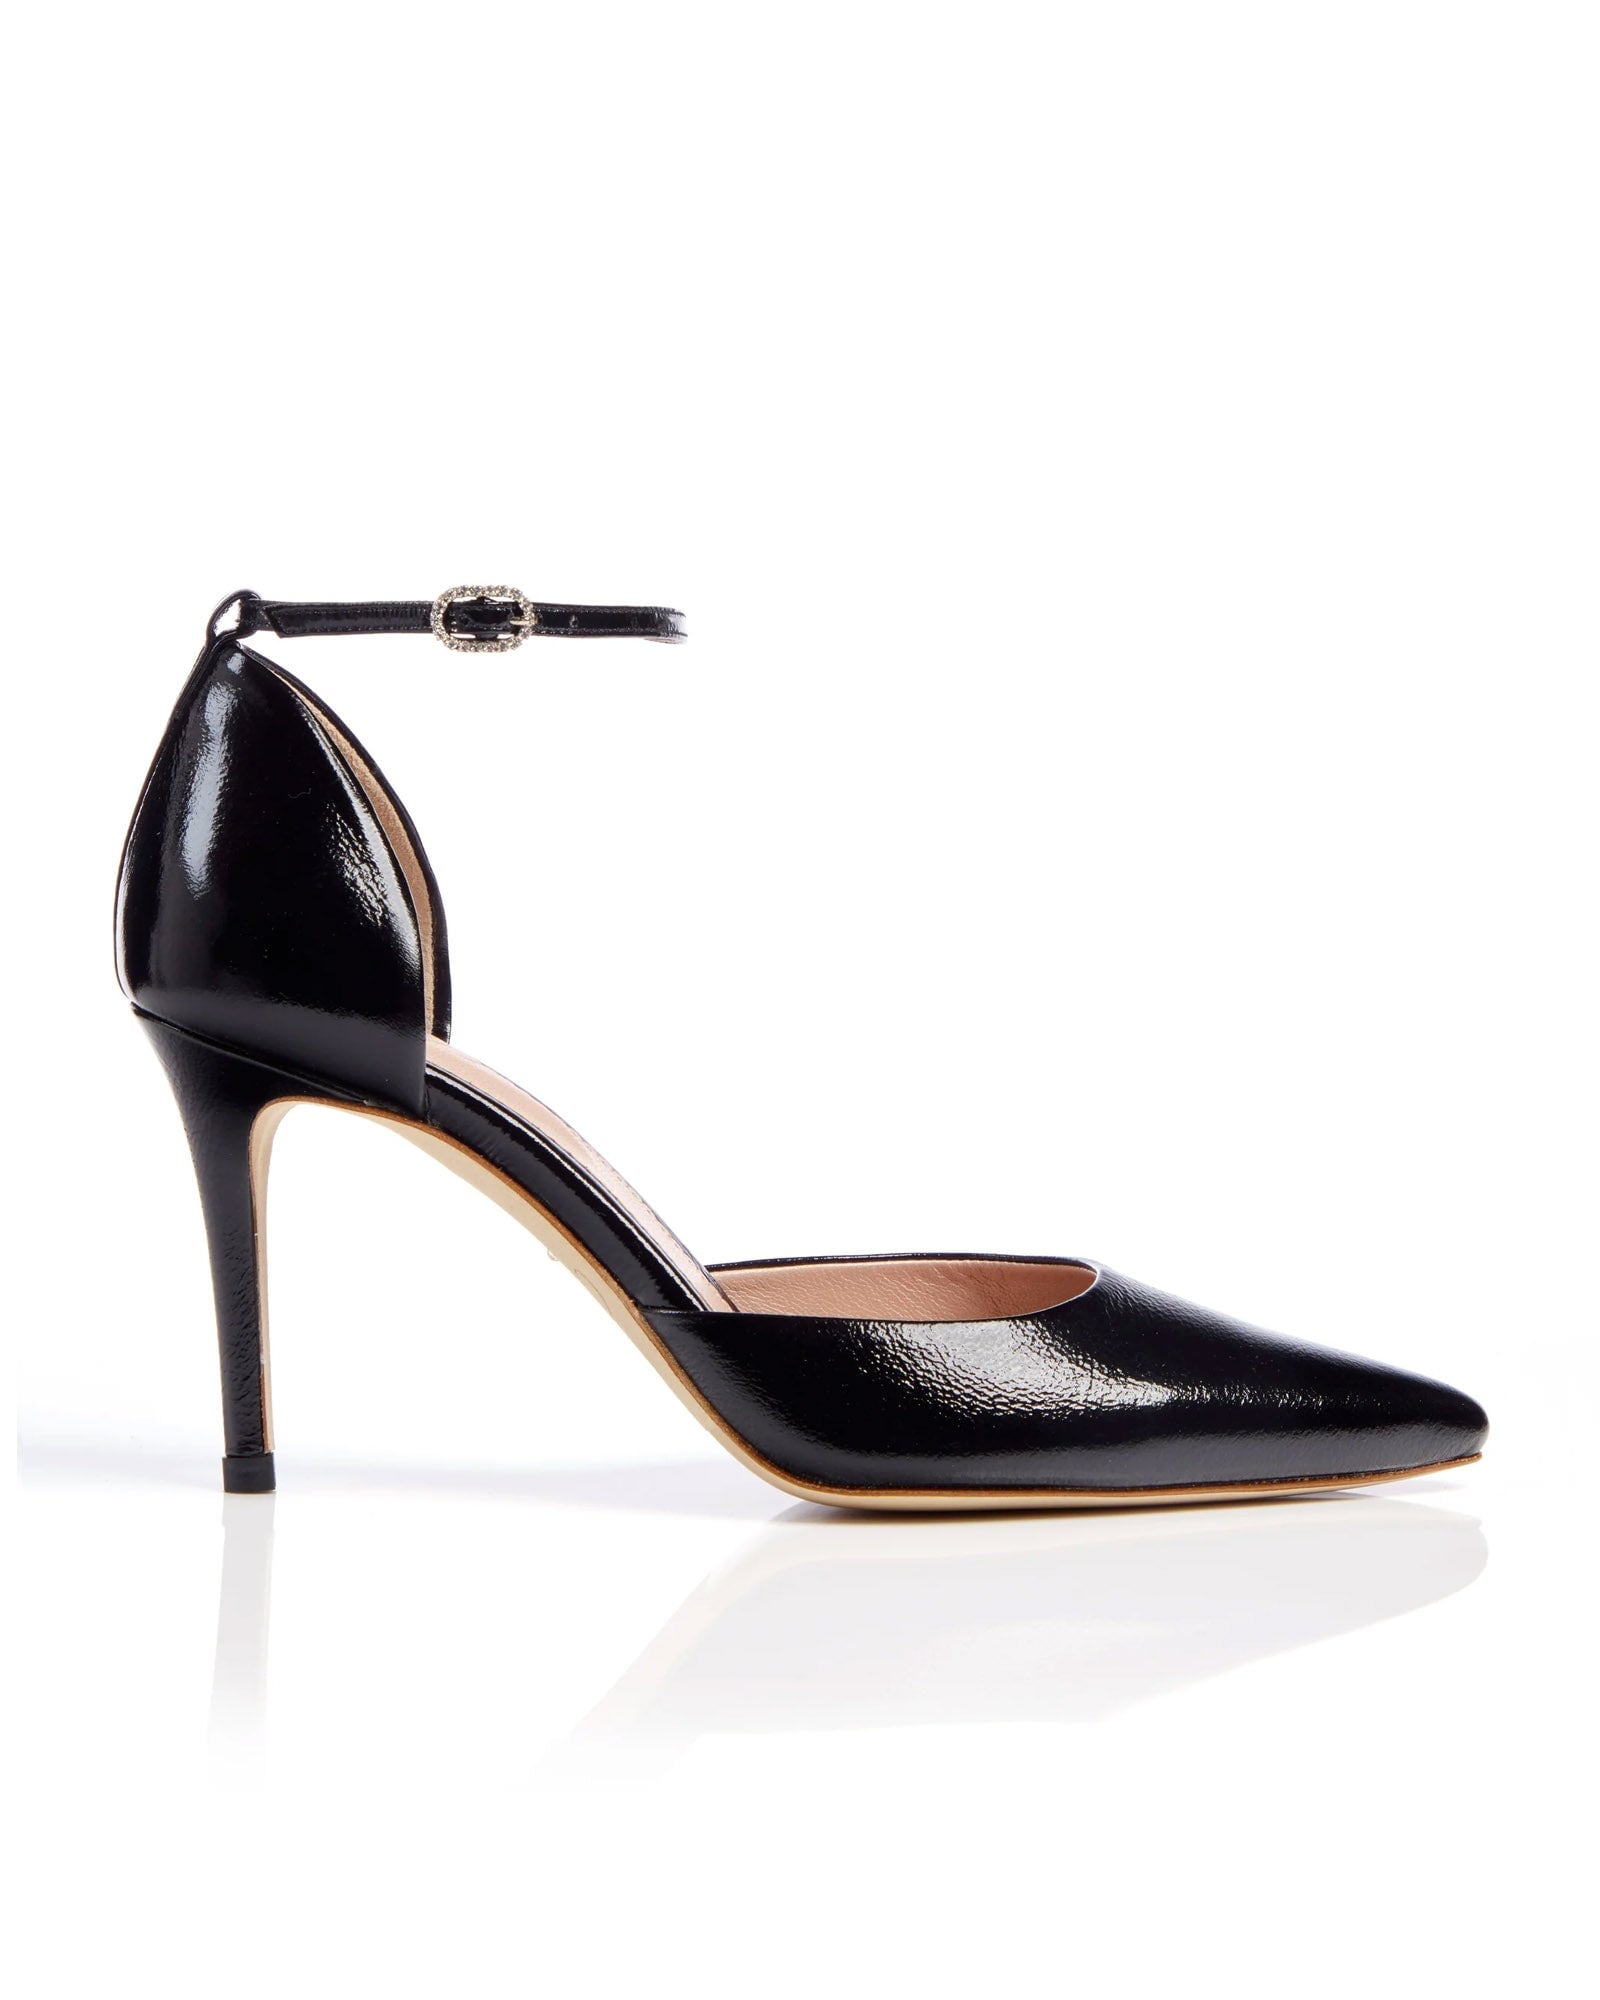 Harriet Patent Black Leather Fashion Shoe Black Leather Pointed Court Shoe  image